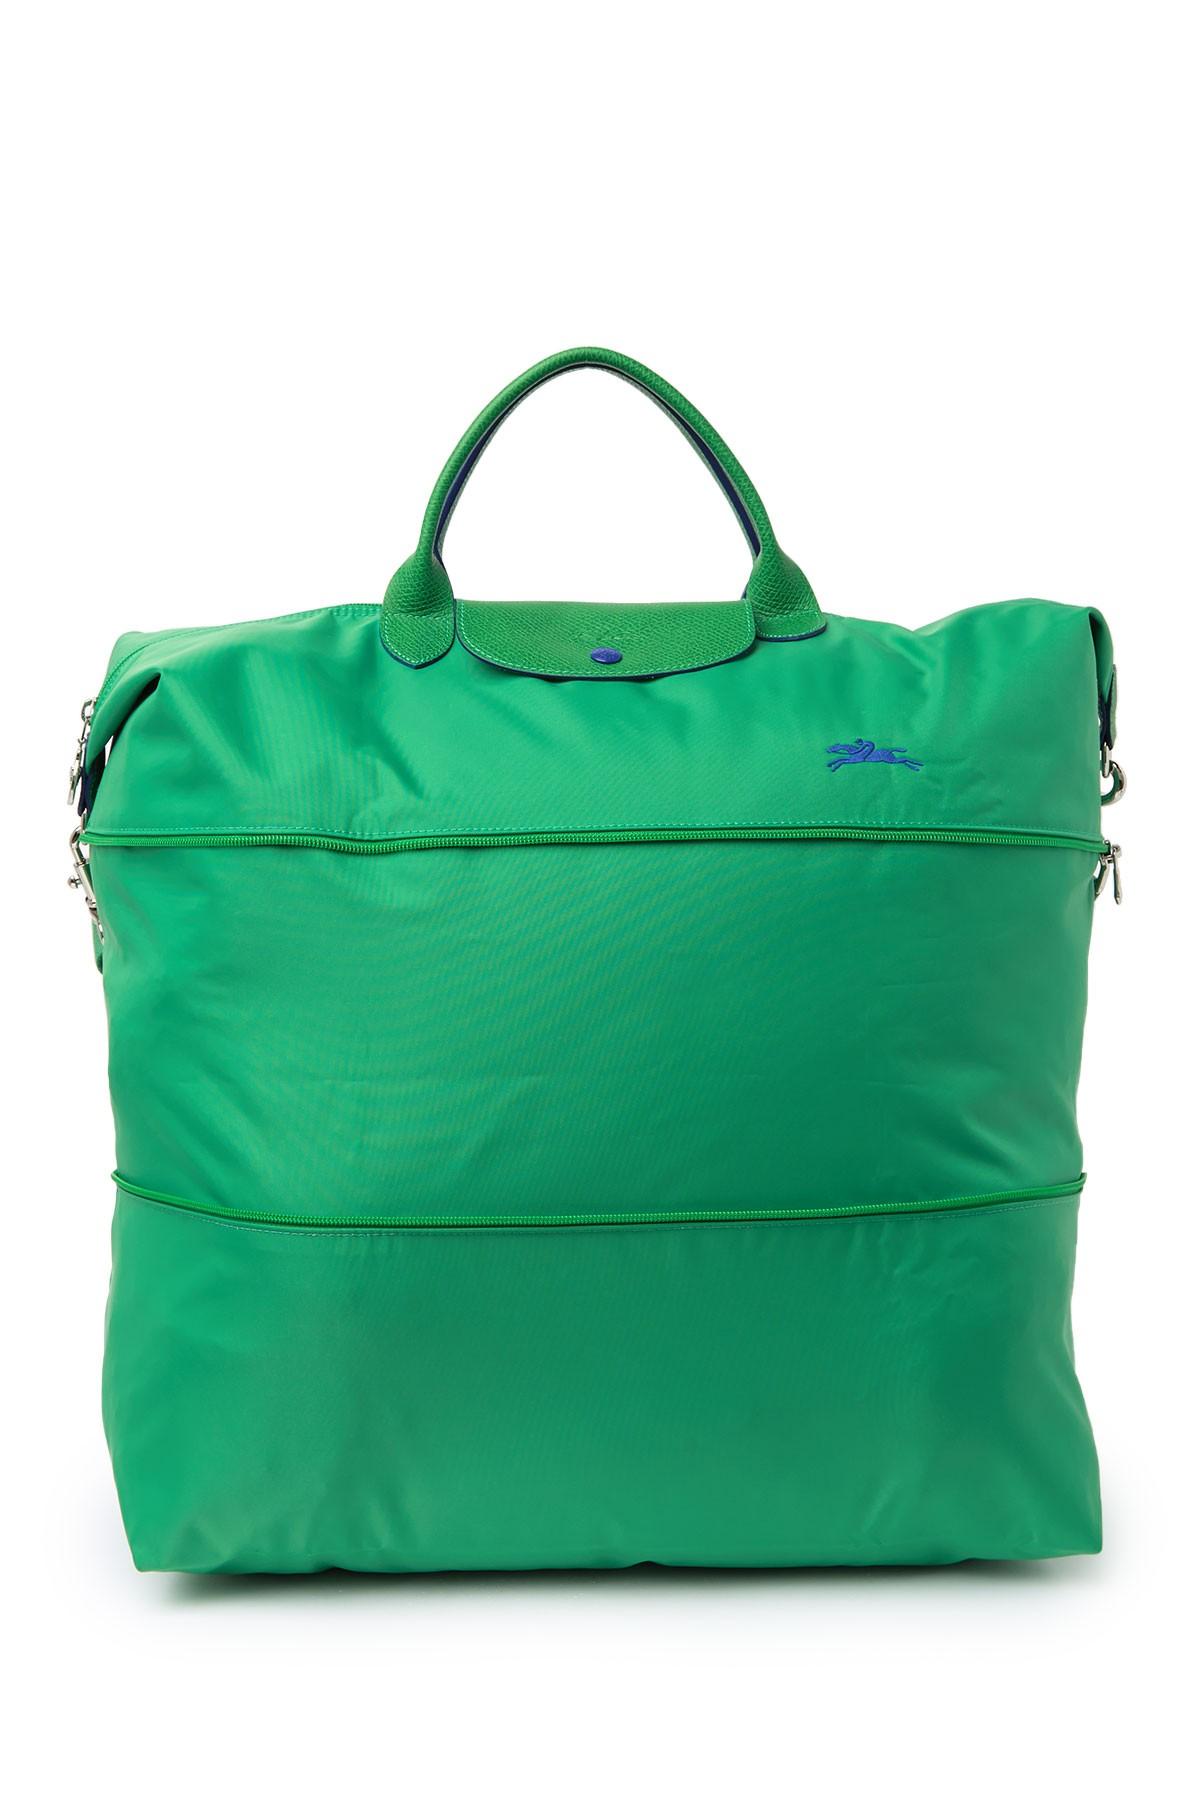 Longchamp Synthetic Le Pliage Expandable Nylon Tote in Green - Lyst